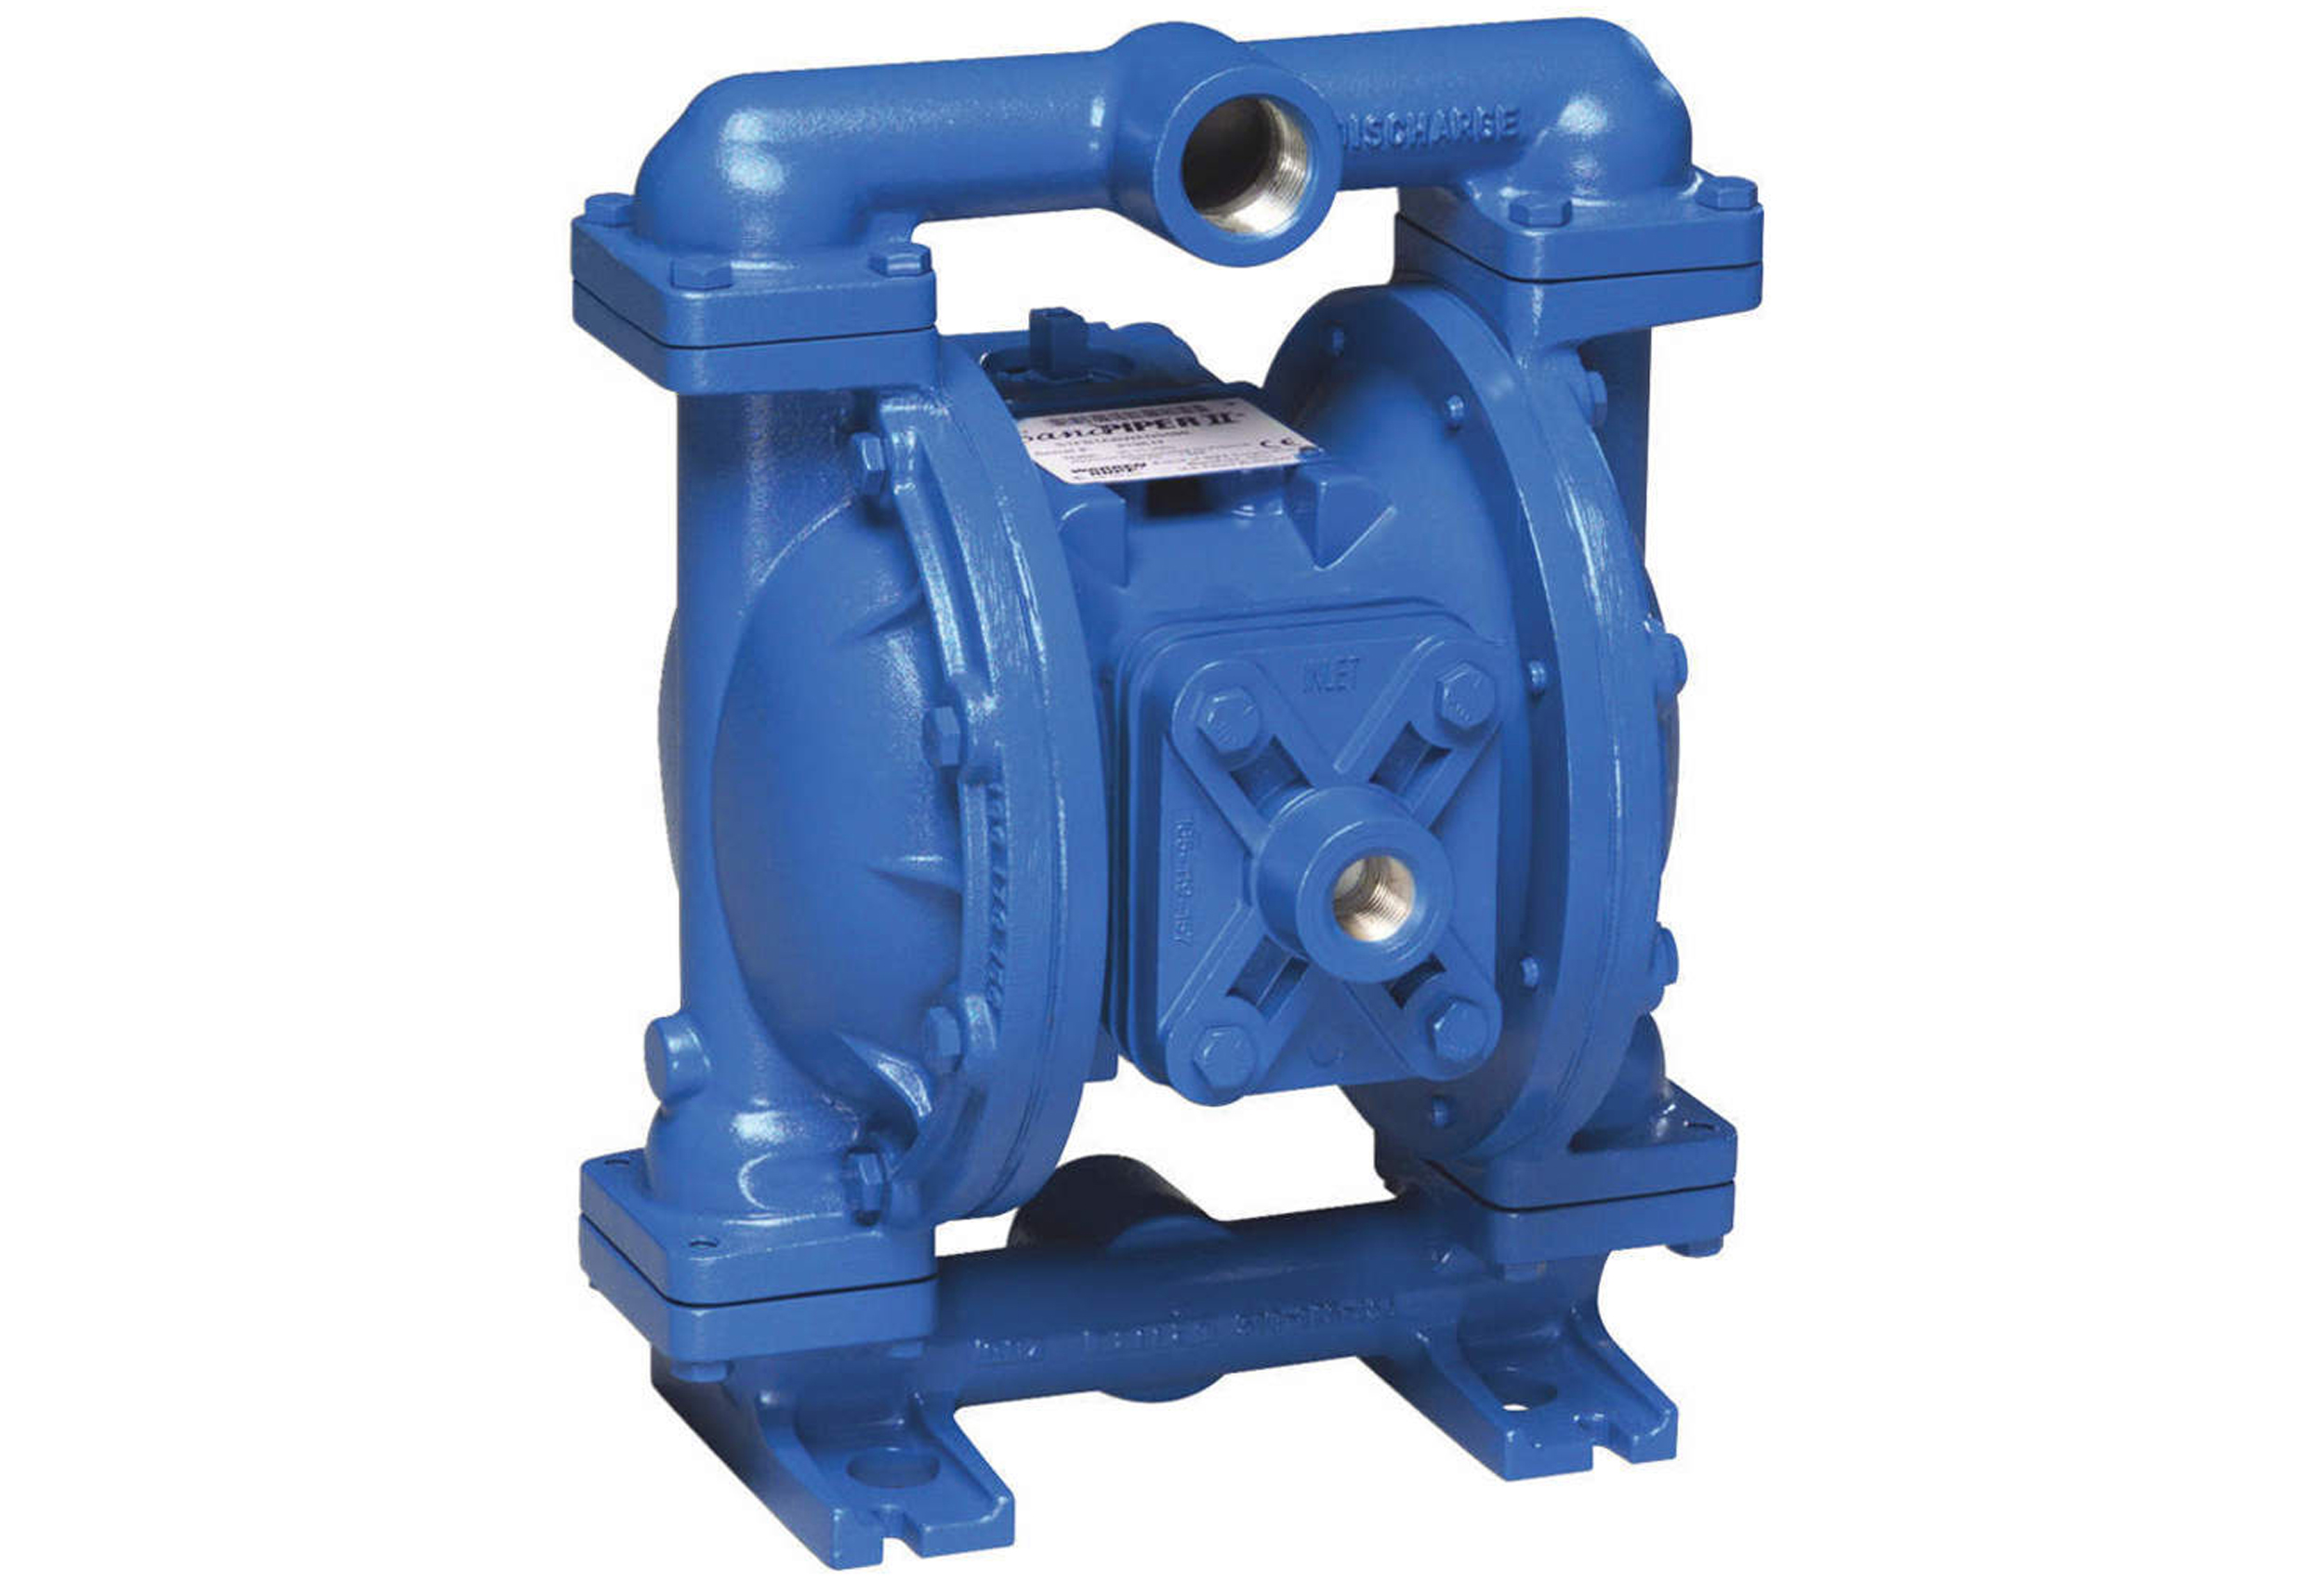 Main Uses Of Pumps In The Manufacturing Industry